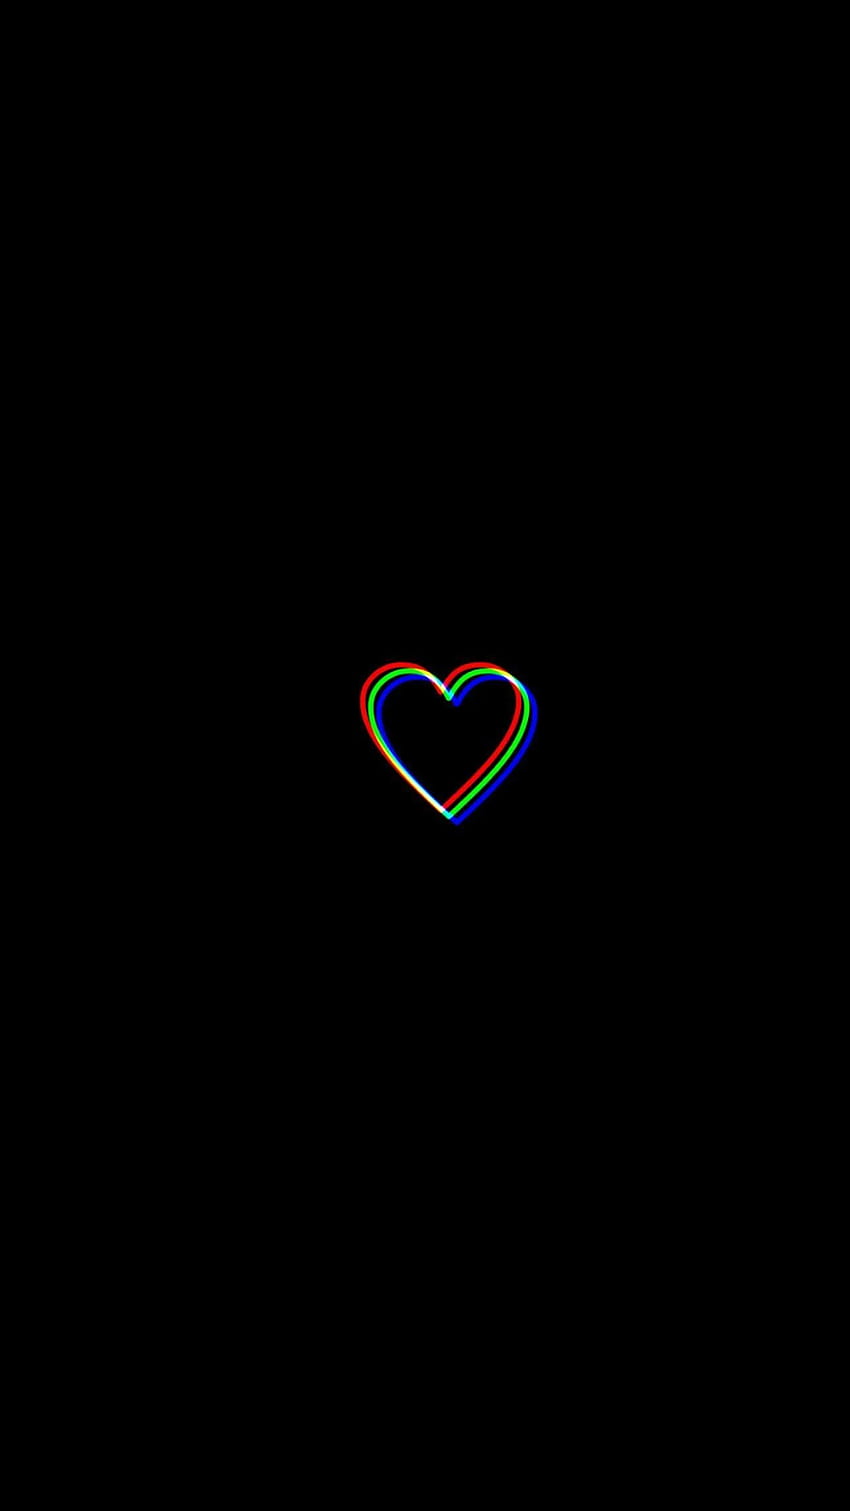 Hand made heart sign on black background HD wallpaper download